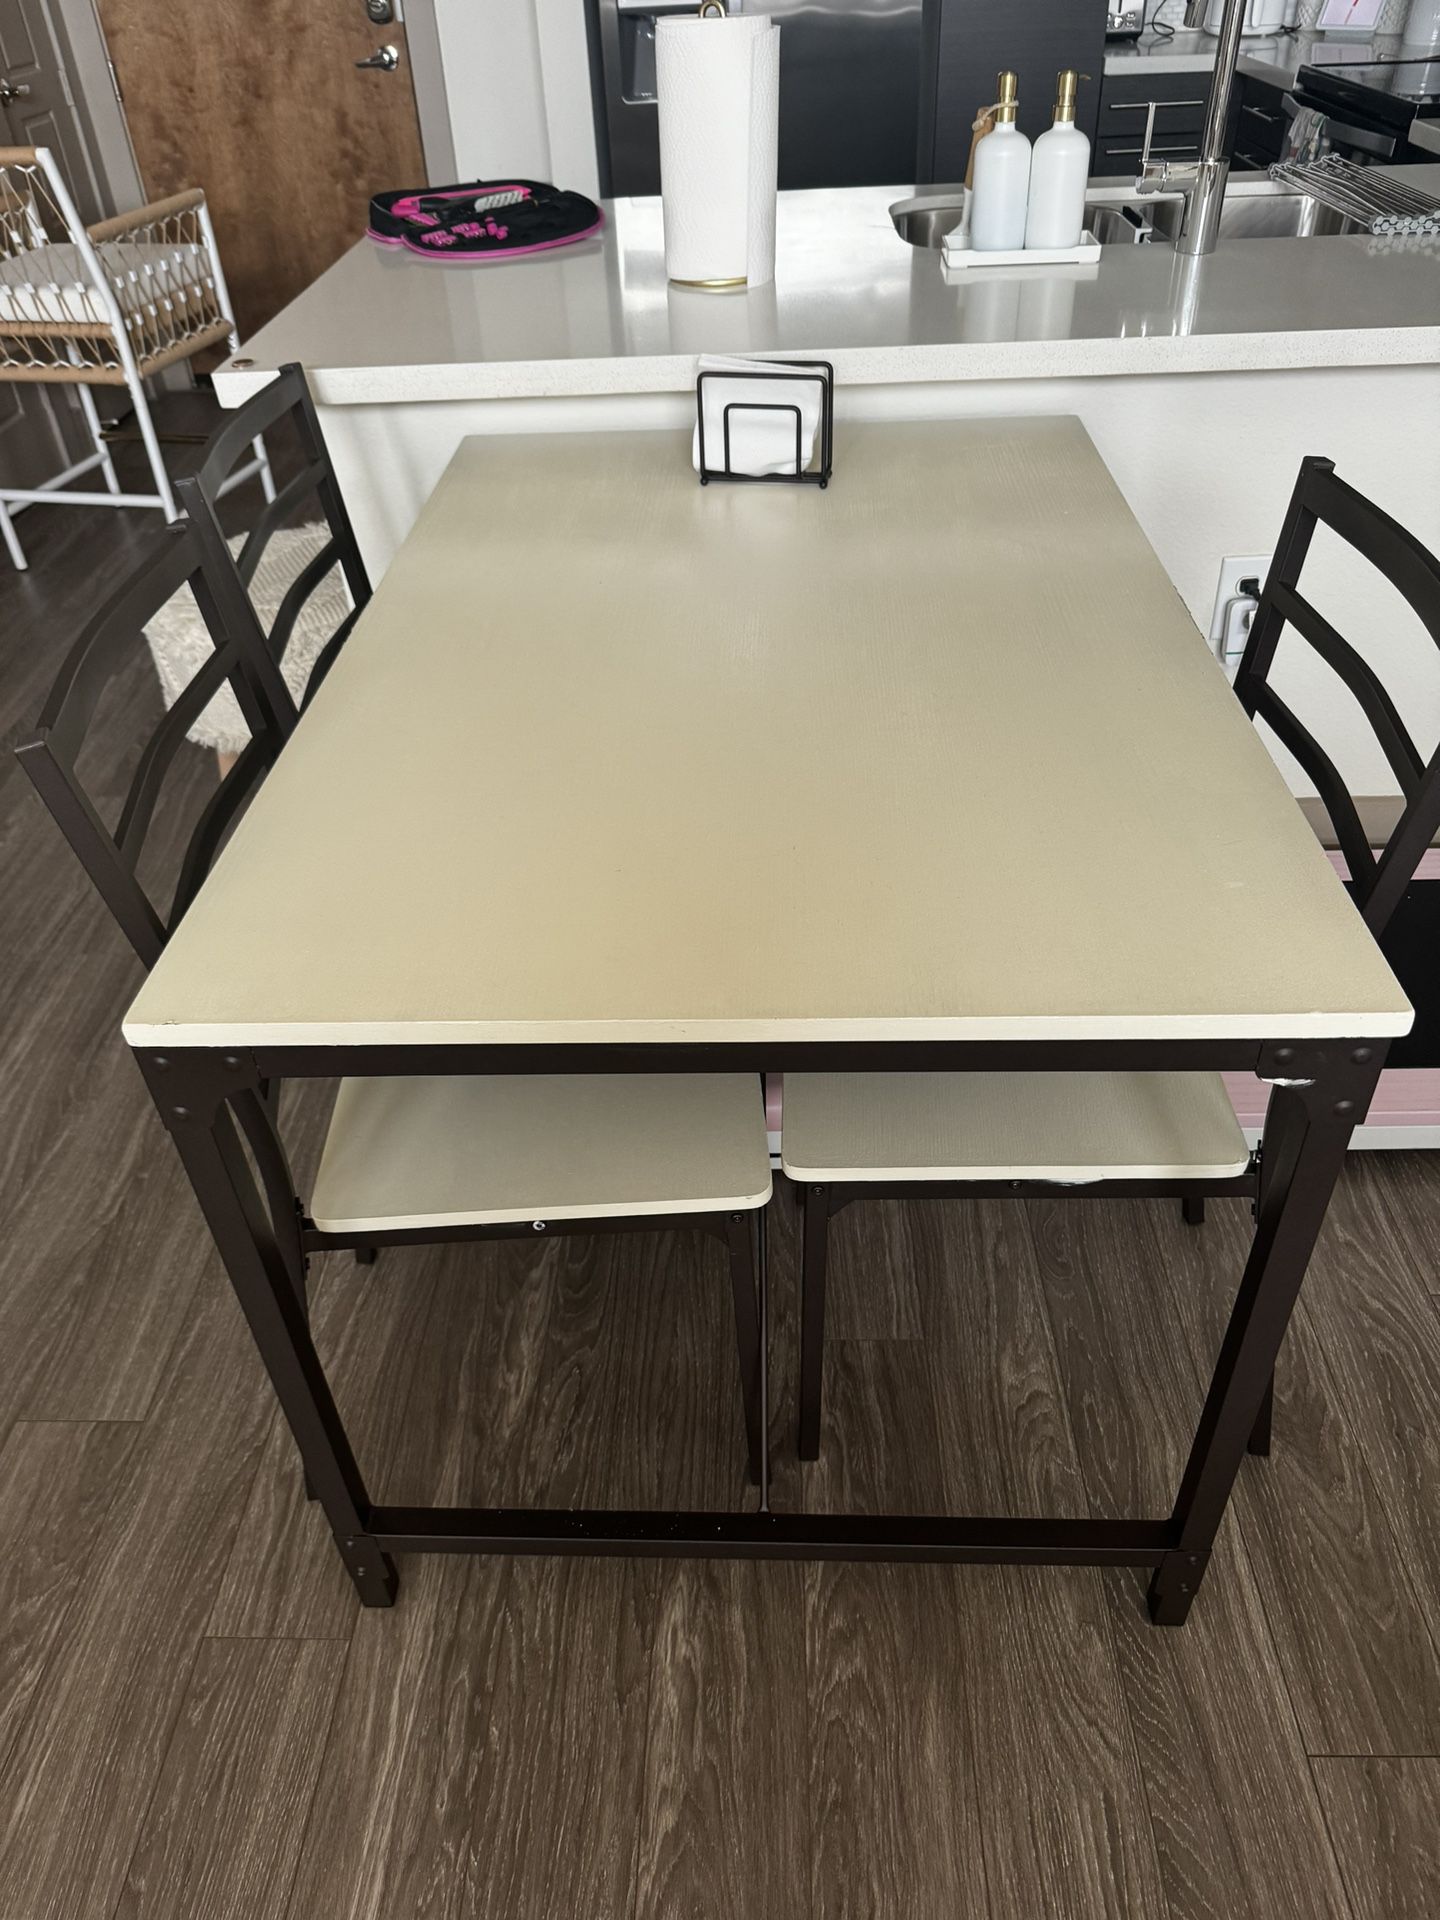 Four Top Dinning Room Table 